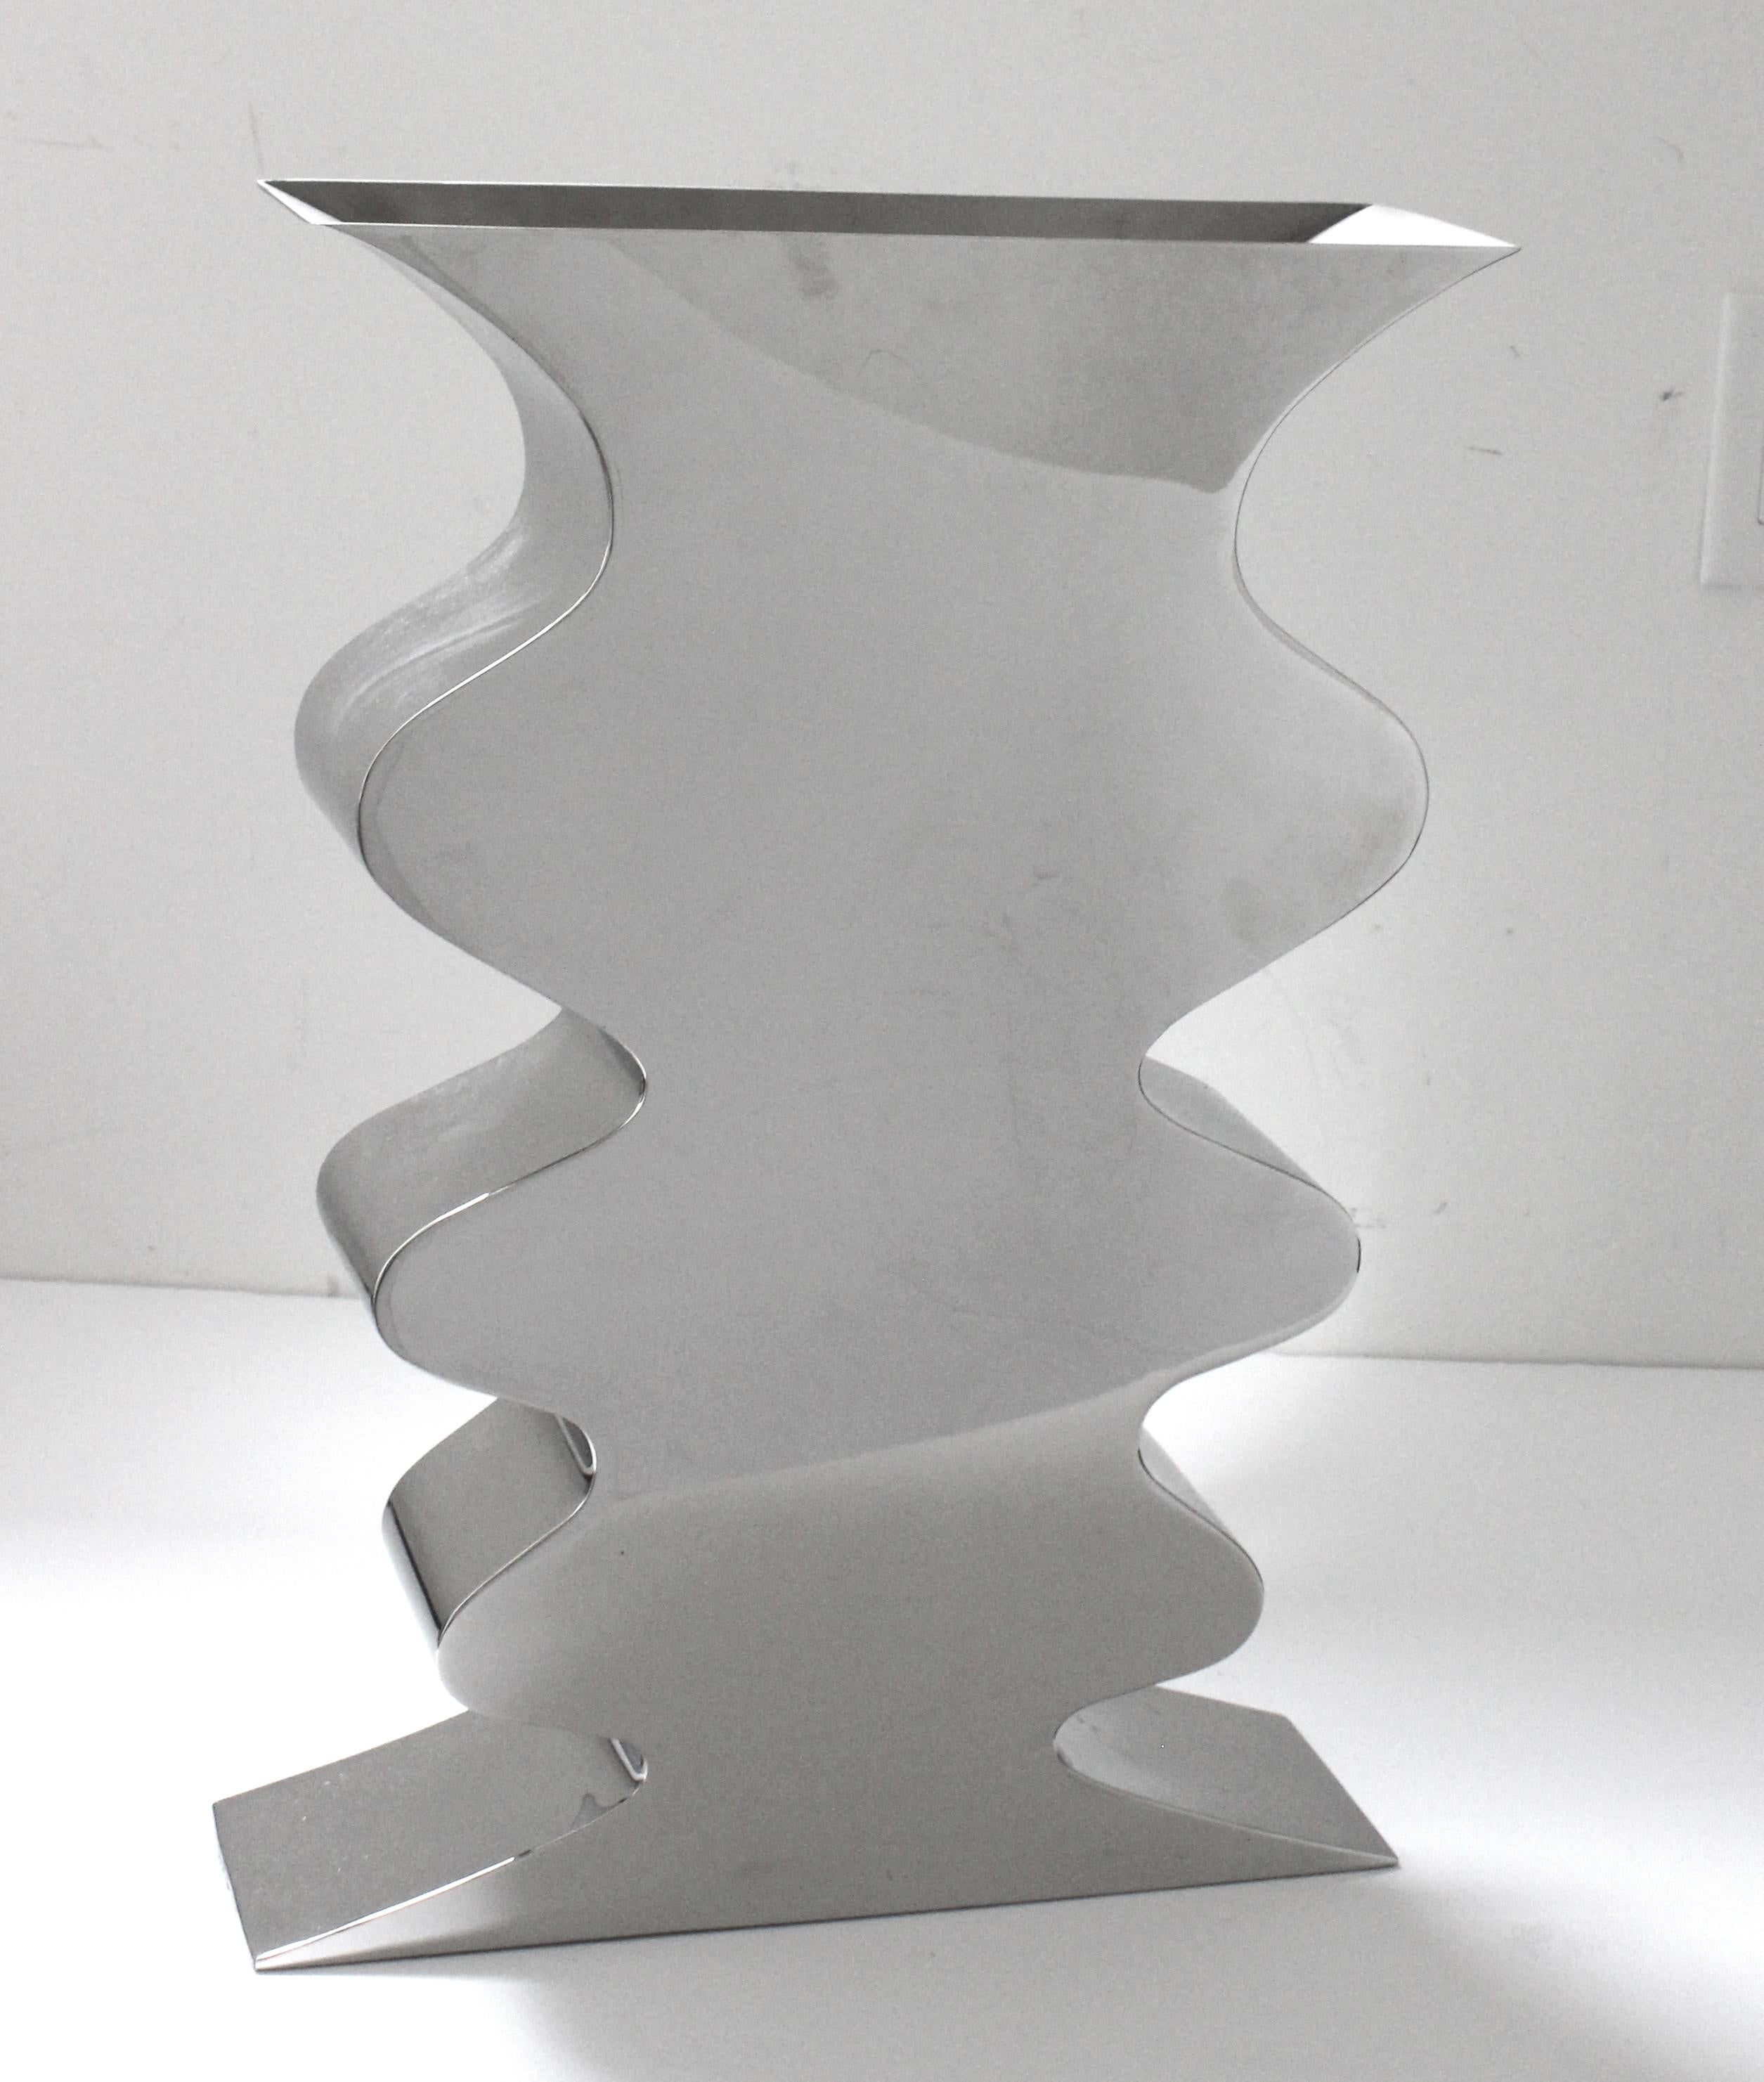 This dramatic polished steel piece was created by Stanley J. Freedman in the 1980s and is titled the 